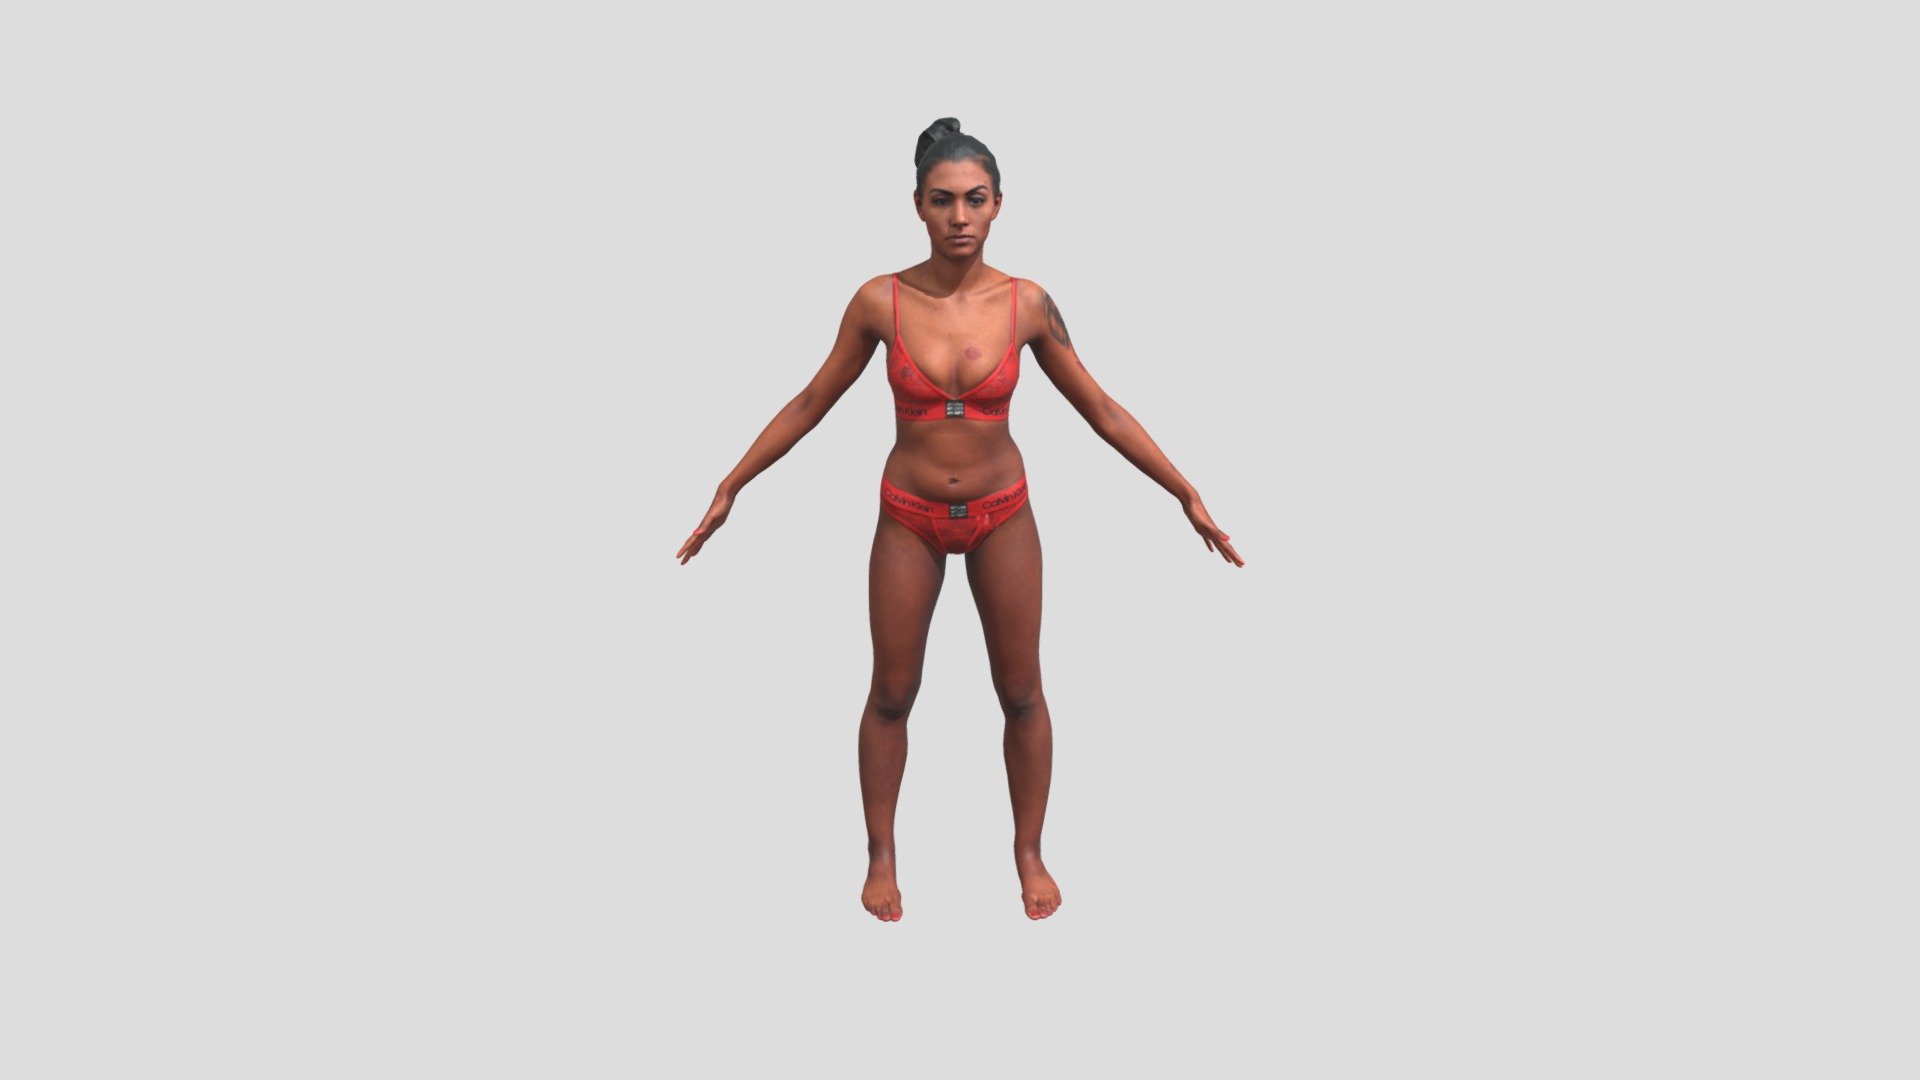 Real Life Human Scans is a project by 3Dsk which focus on diversity of human bodies, faces and expressions.

Ethnicity: white
Gender: female
Age: 22
Height: 176 cm
Weight: 57 kg

Technical Specifications:




OBJ file / 16 320 000 polys

8k / PNG diffuse texture

NOTE: This is a cleaned raw scan in Zbrush postproduction but no retopology.
This is the version with less poly without Zbrush file.

3Dsk provides all you need from virtual casting studio.
Model casting, neutral &amp; morph expression scans, full body scans,
accessories and cloth scans, 3D postproduction, photoshooting of full body,
portrait, hair, eyes and skin &amp; other on demand services 3d model